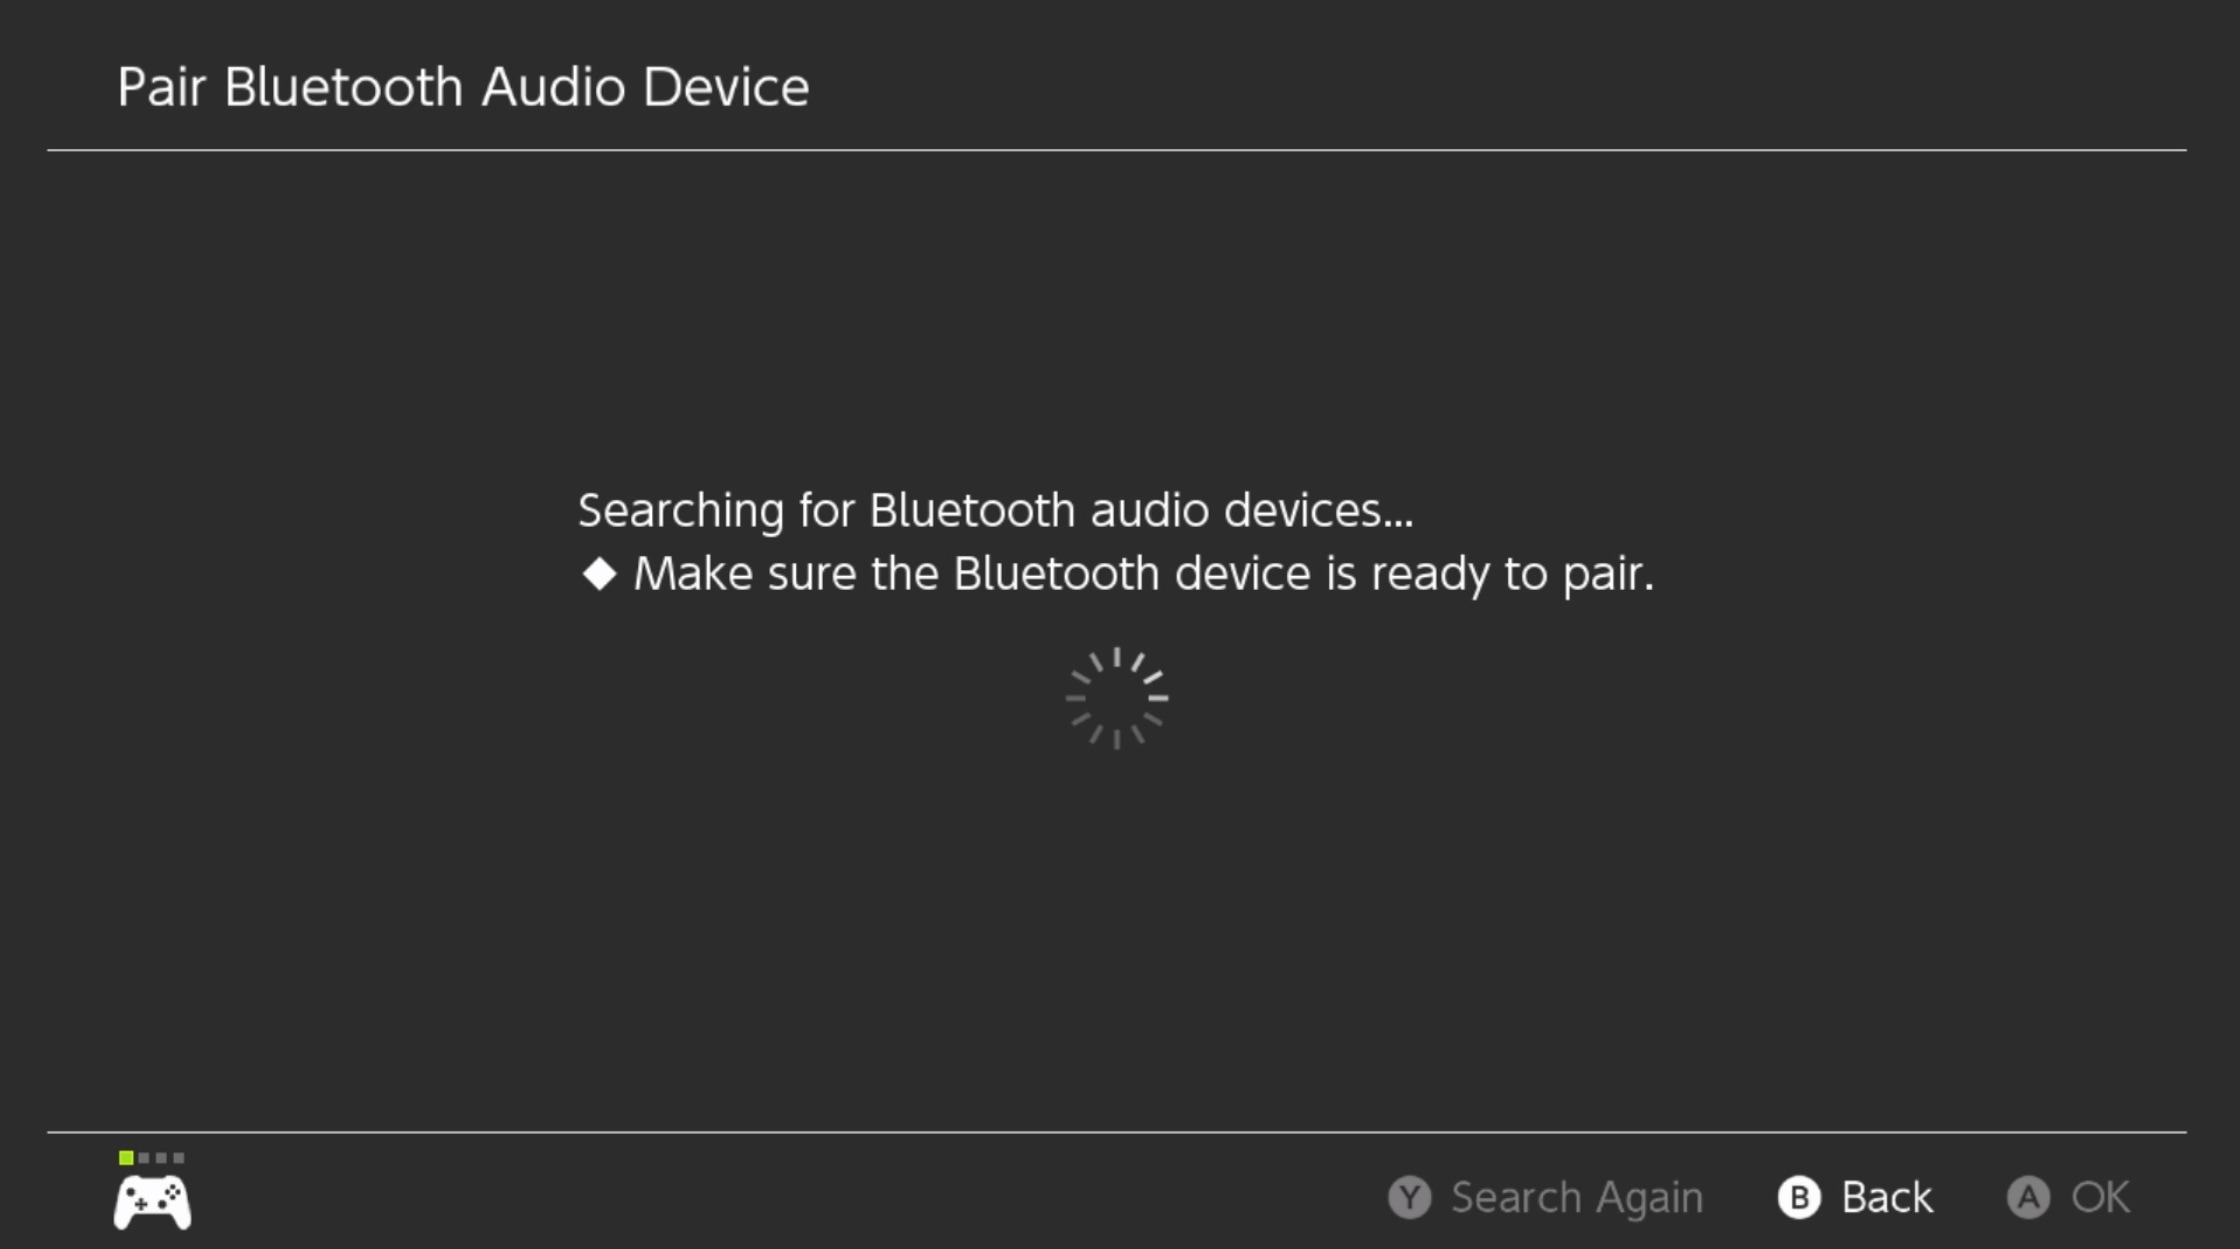 Nintendo Switch searches for nearby Bluetooth audio devices.